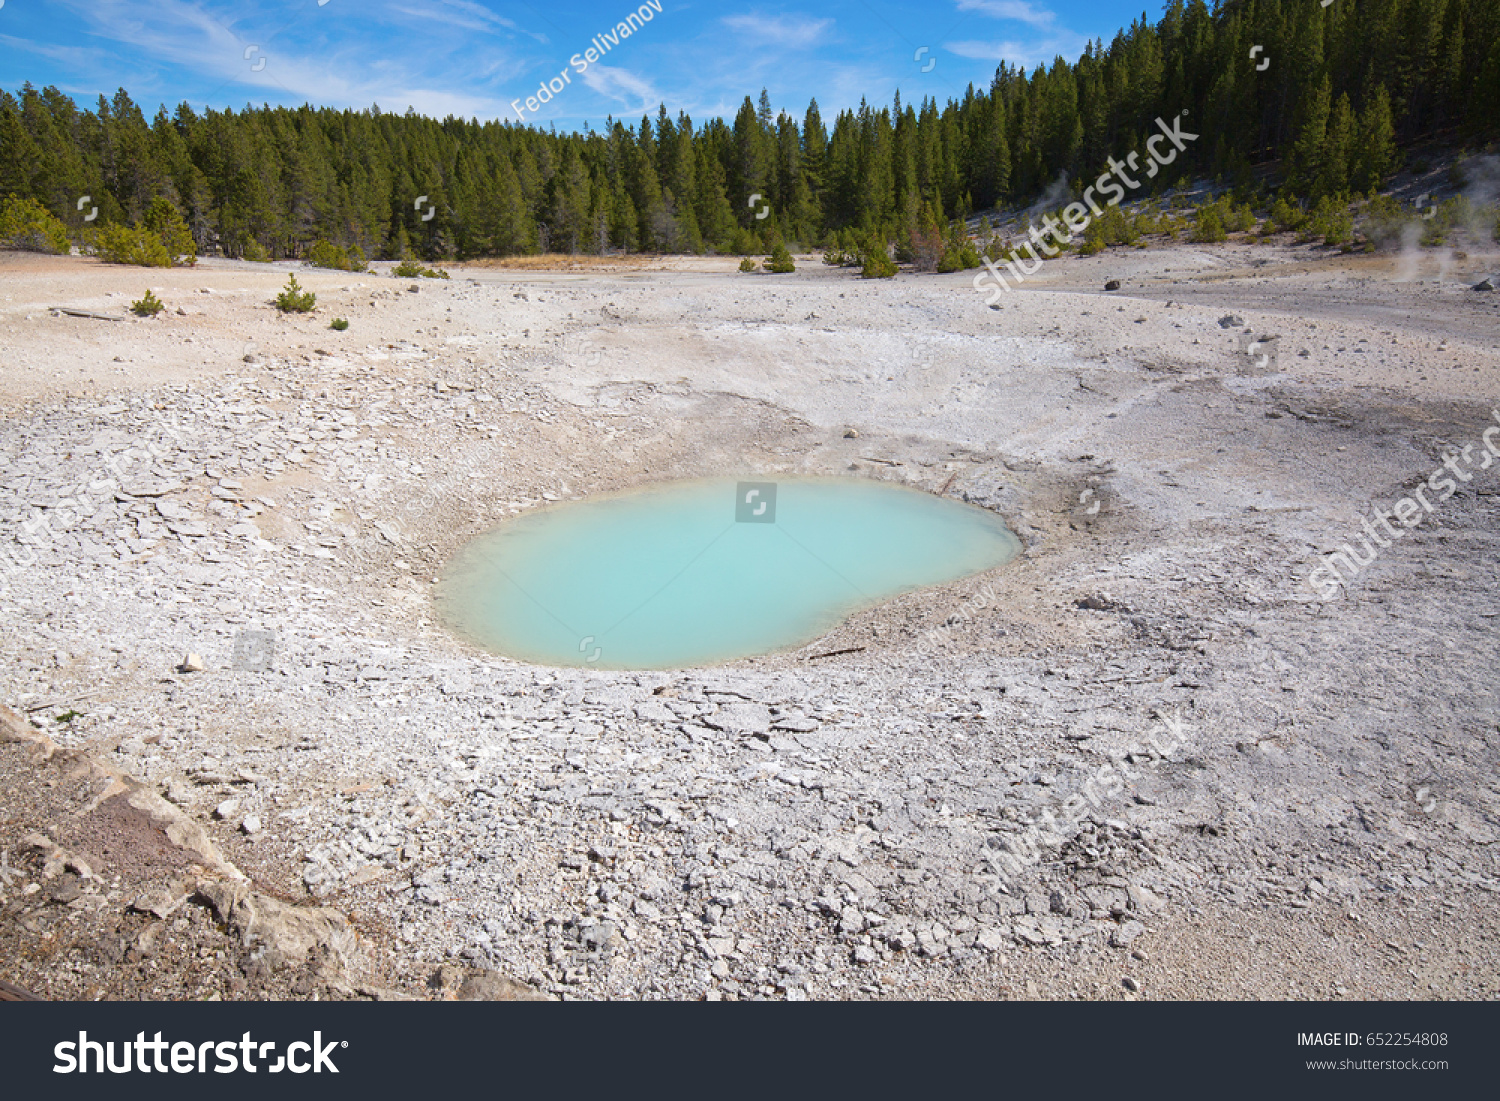 Norris geyser basin in the Yellowstone National park, USA #652254808